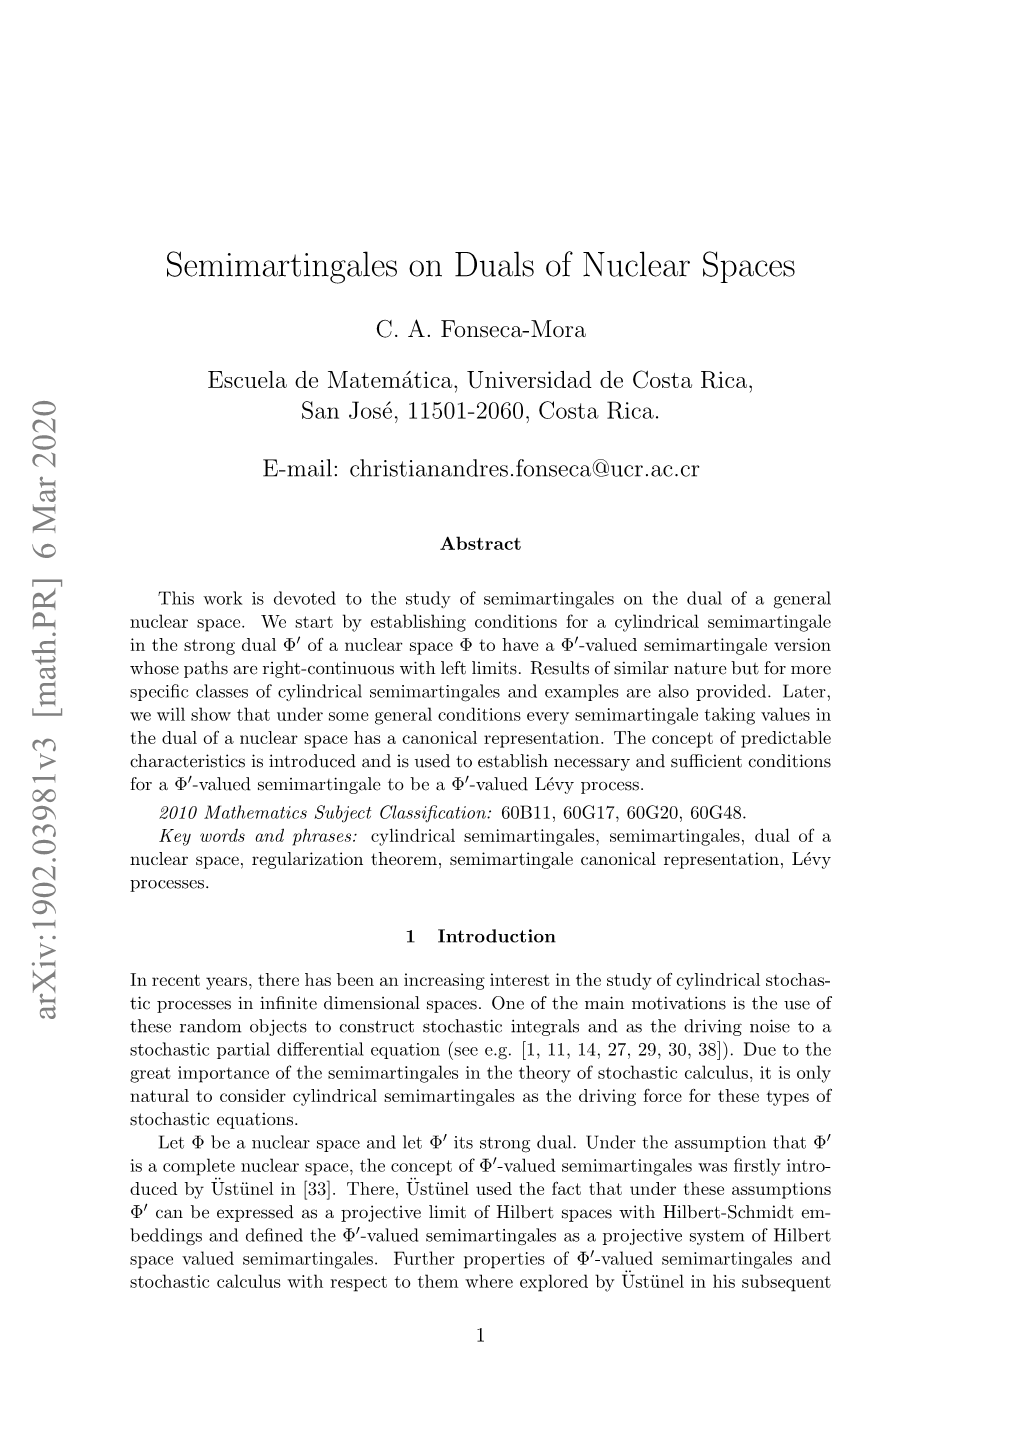 Semimartingales on Duals of Nuclear Spaces